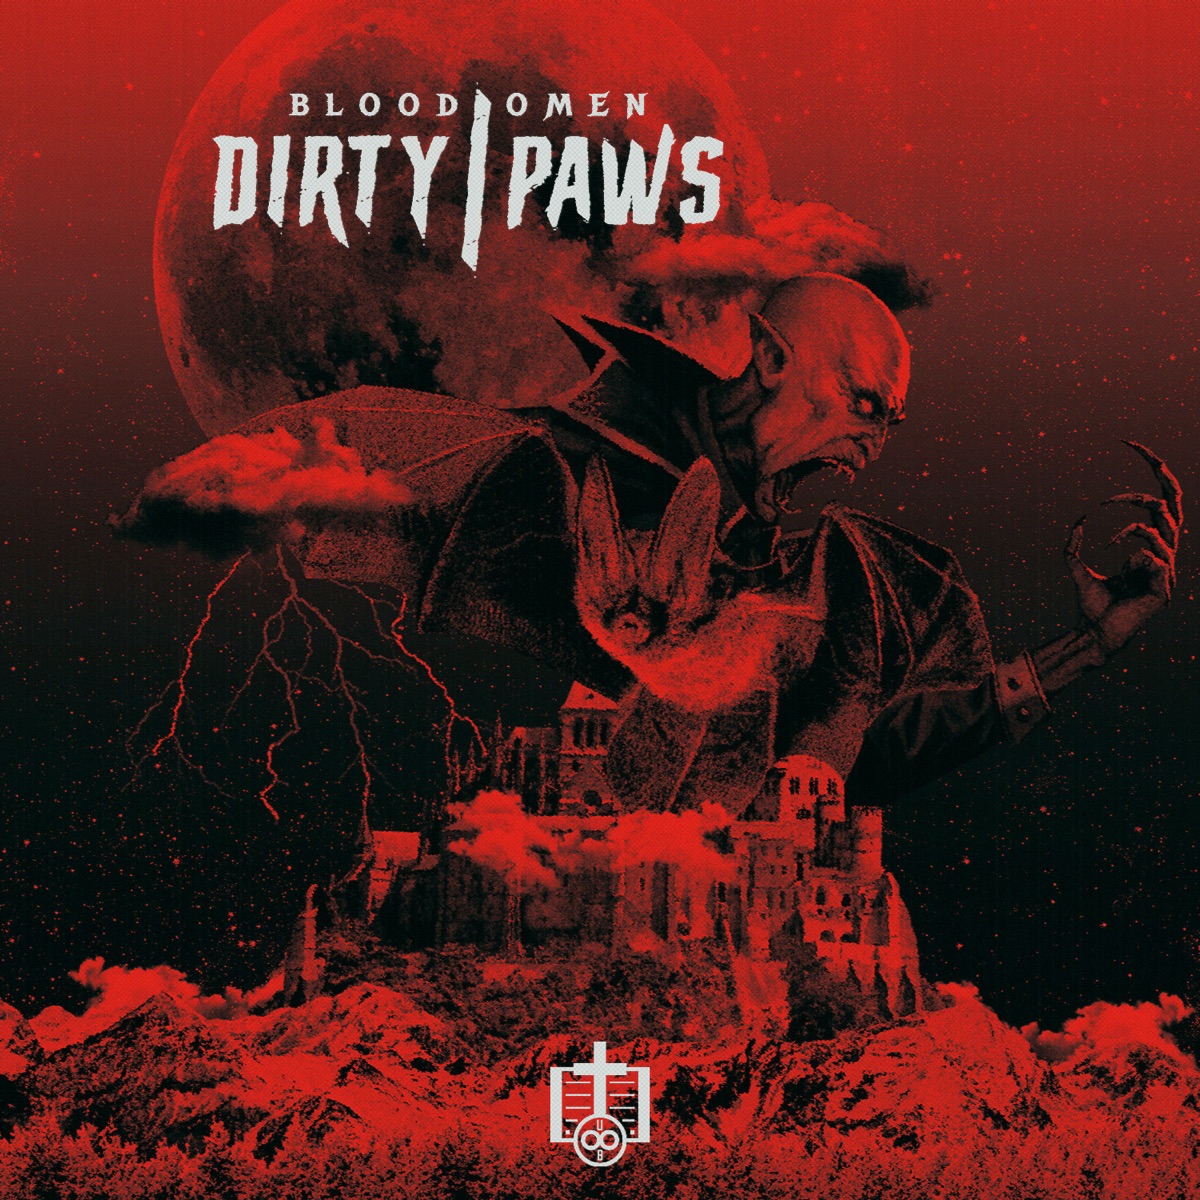 Maniacz - Single by Dirty Paws on Apple Music